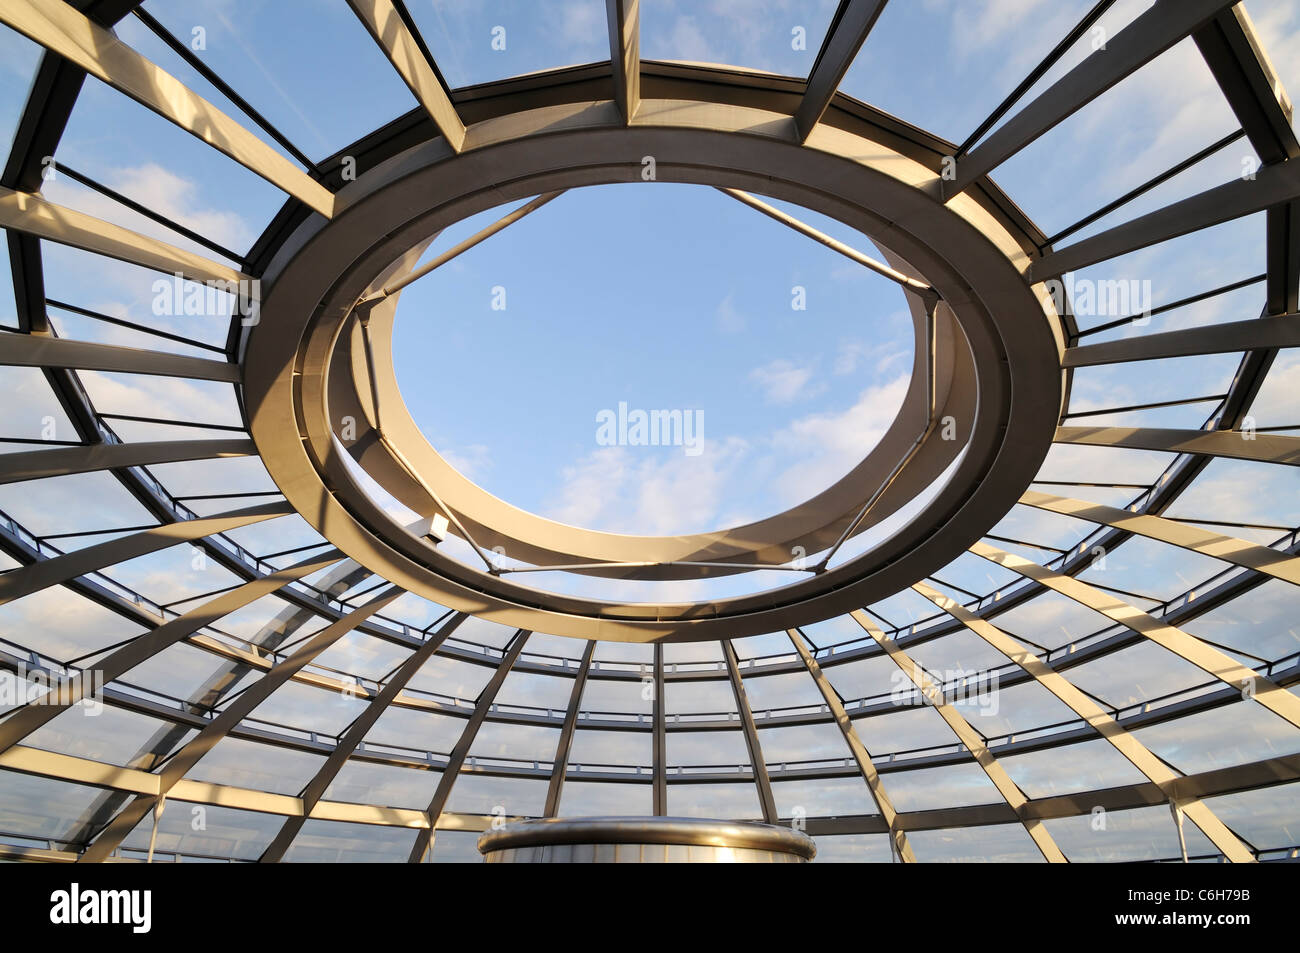 Sky View of the Reichstag Dome from Inside. Top of the Reichstag, Germany's parliament building, Berlin Stock Photo